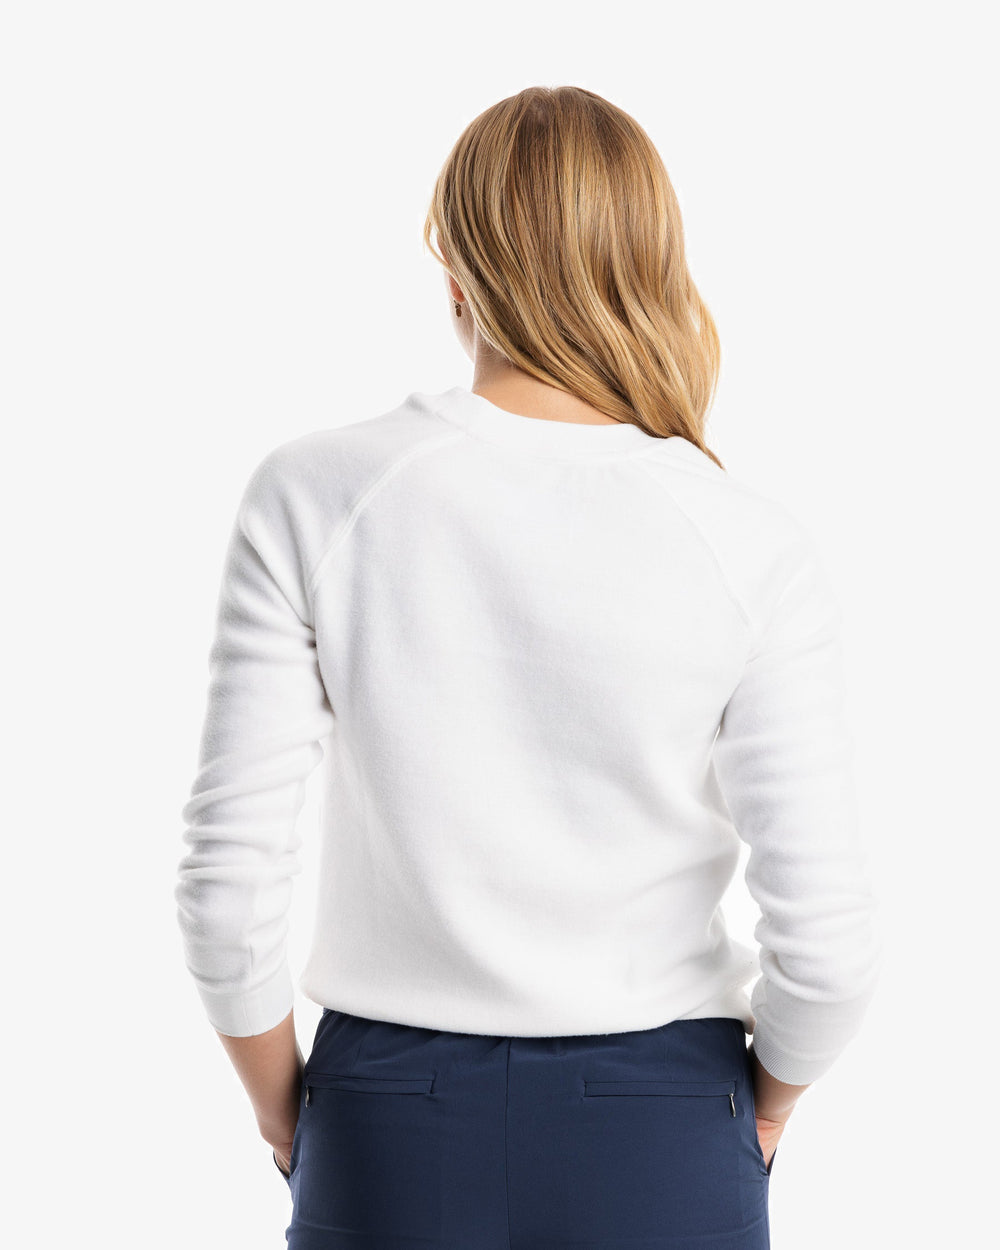 The model back of the Beachside Sun Farer Crewneck Sweatshirt from Southern Tide - Classic White